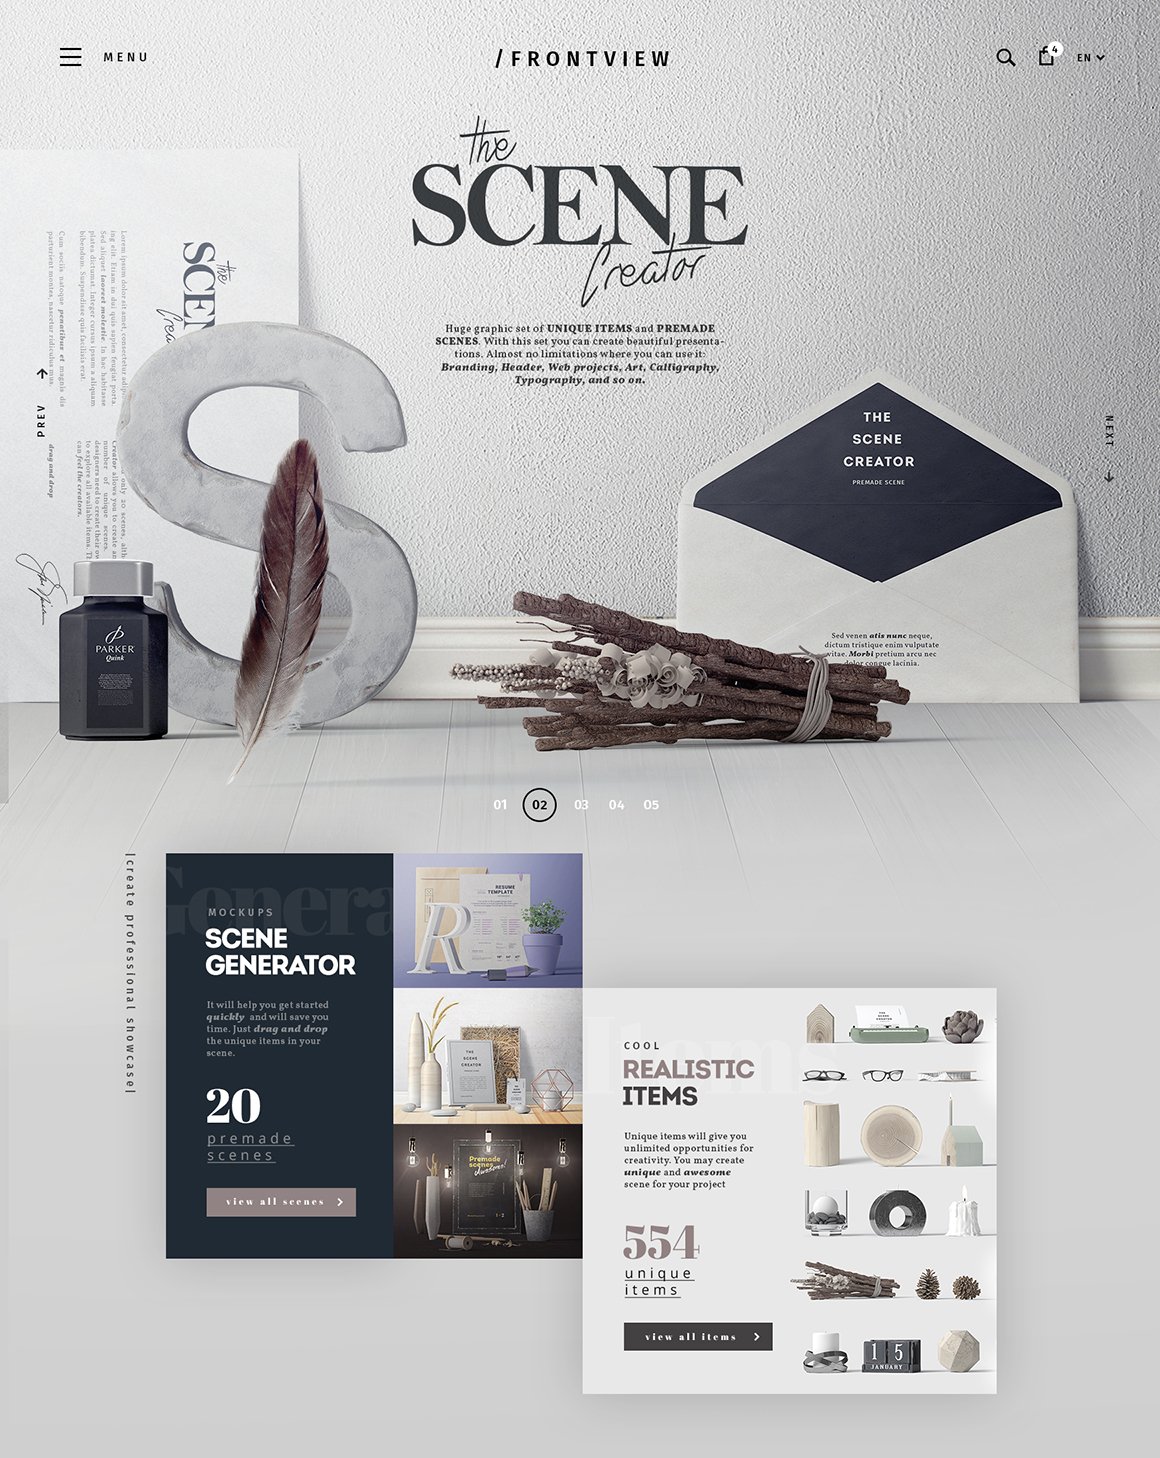 50%OFF The Scene Creator - Frontview preview image.